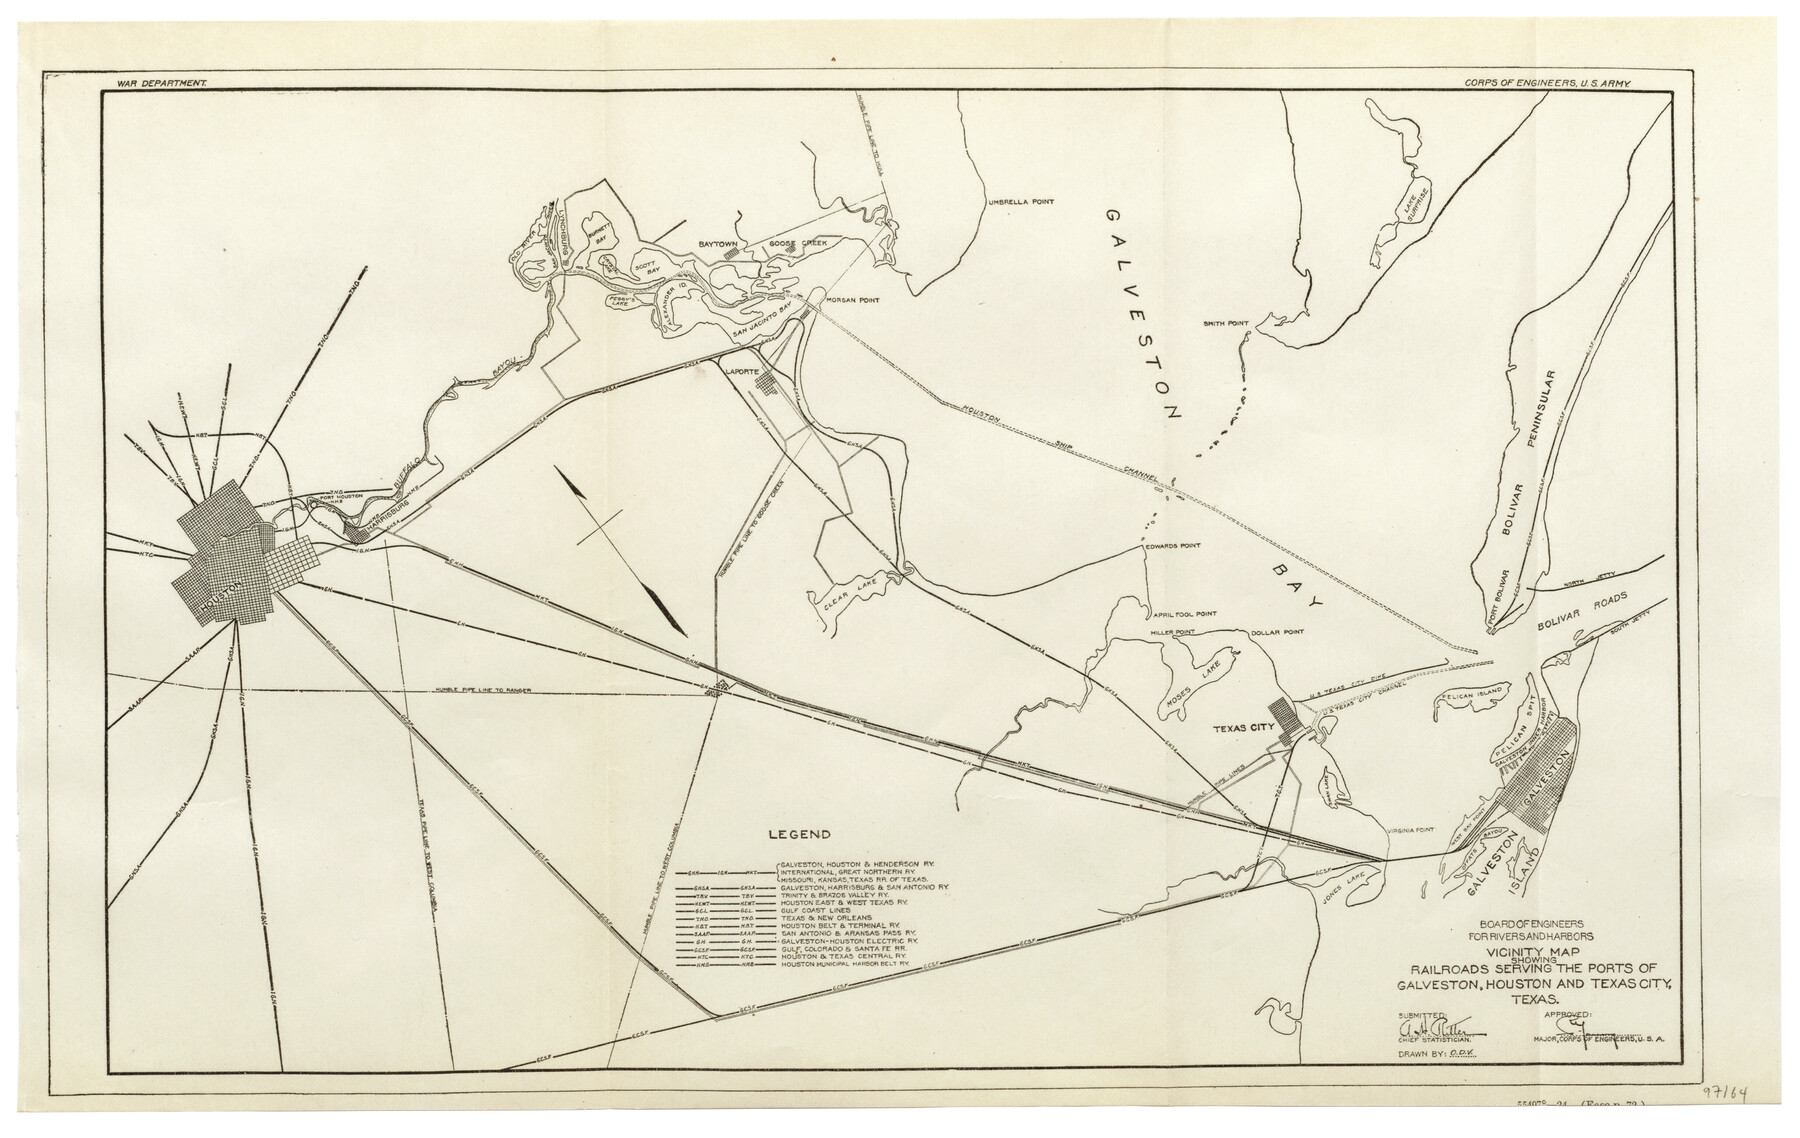 97164, Vicinity map showing railroads serving the ports of Galveston, Houston and Texas City, Texas, General Map Collection